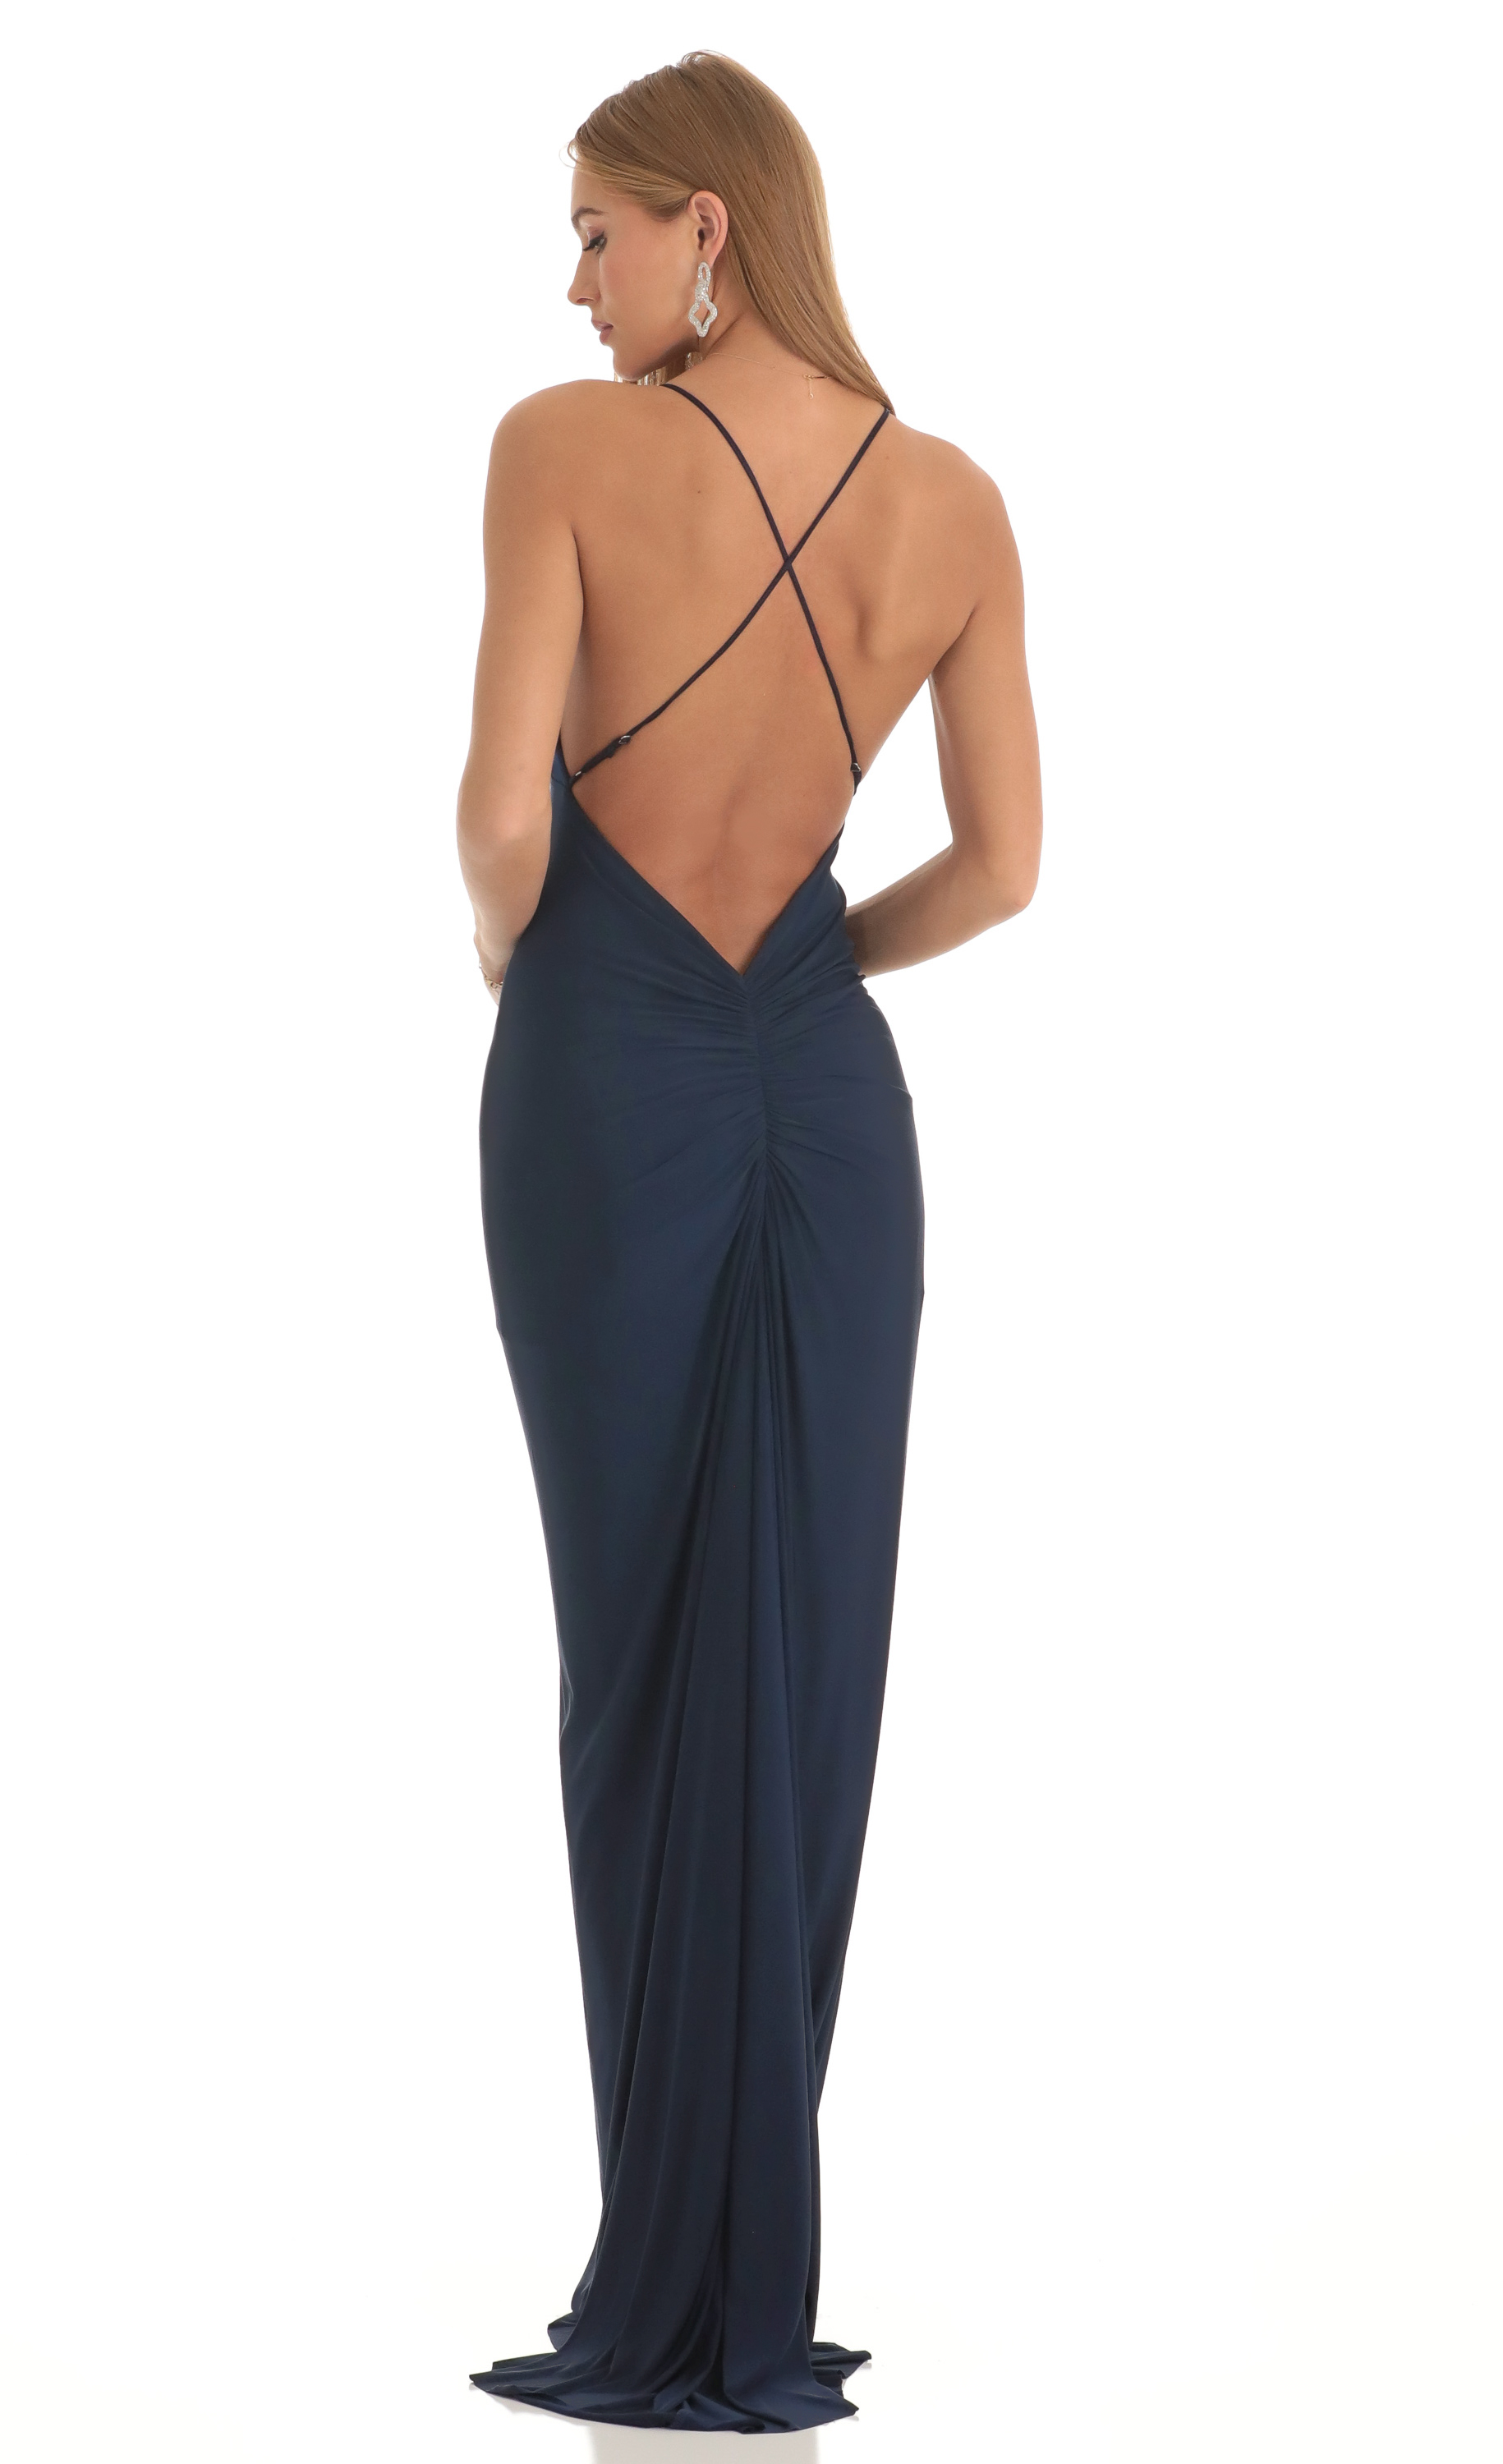 Ladie Gathered Cross Back Maxi Dress in Navy